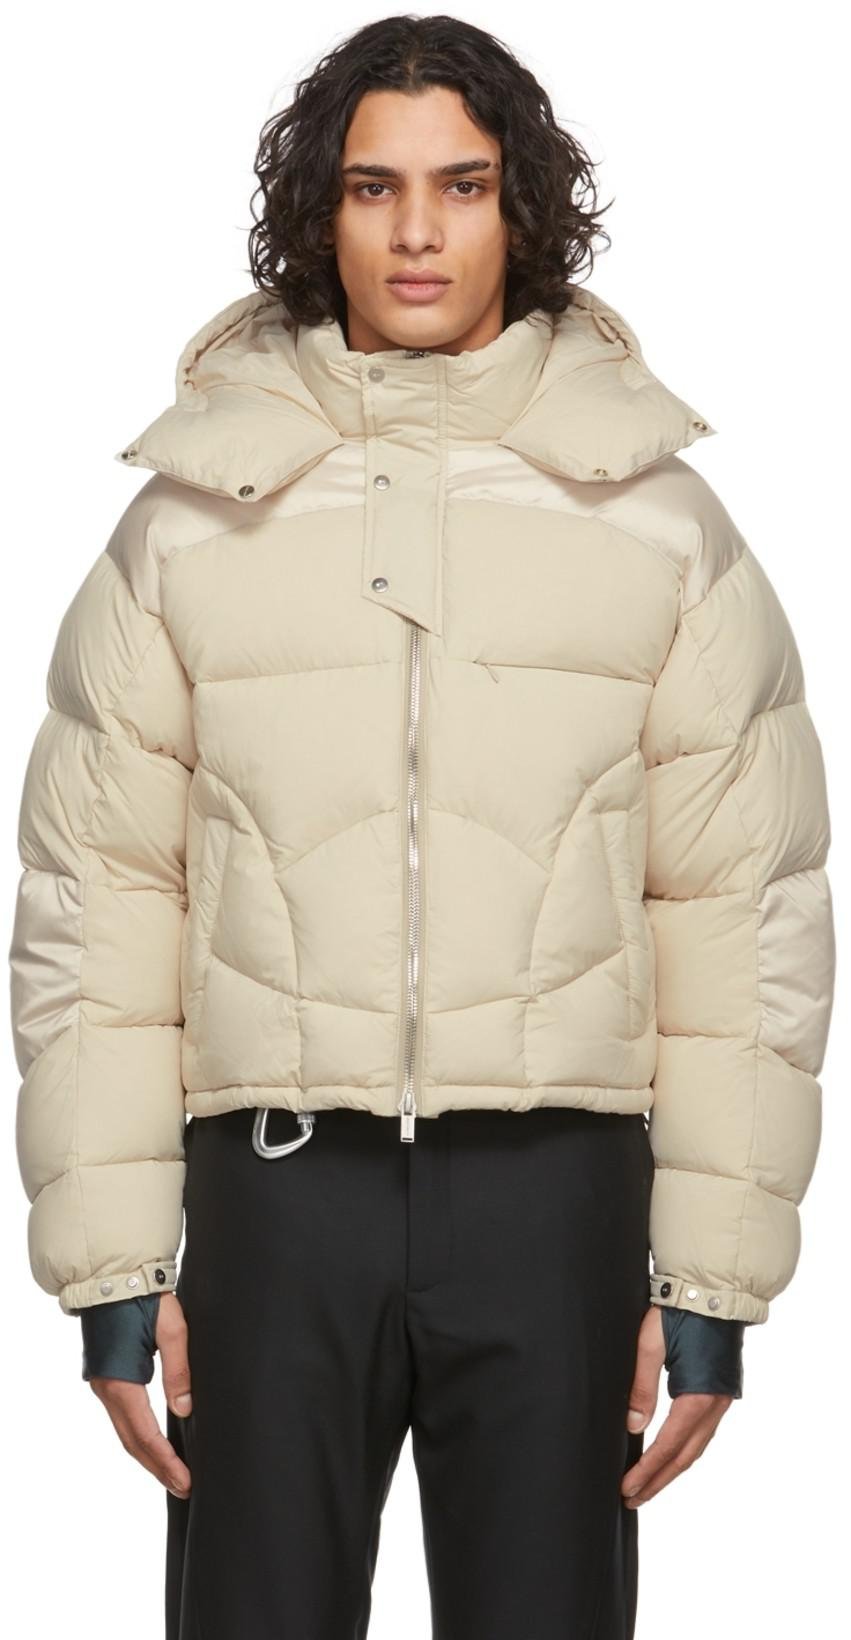 Off-White Down Jacket by HELIOT EMIL | jellibeans